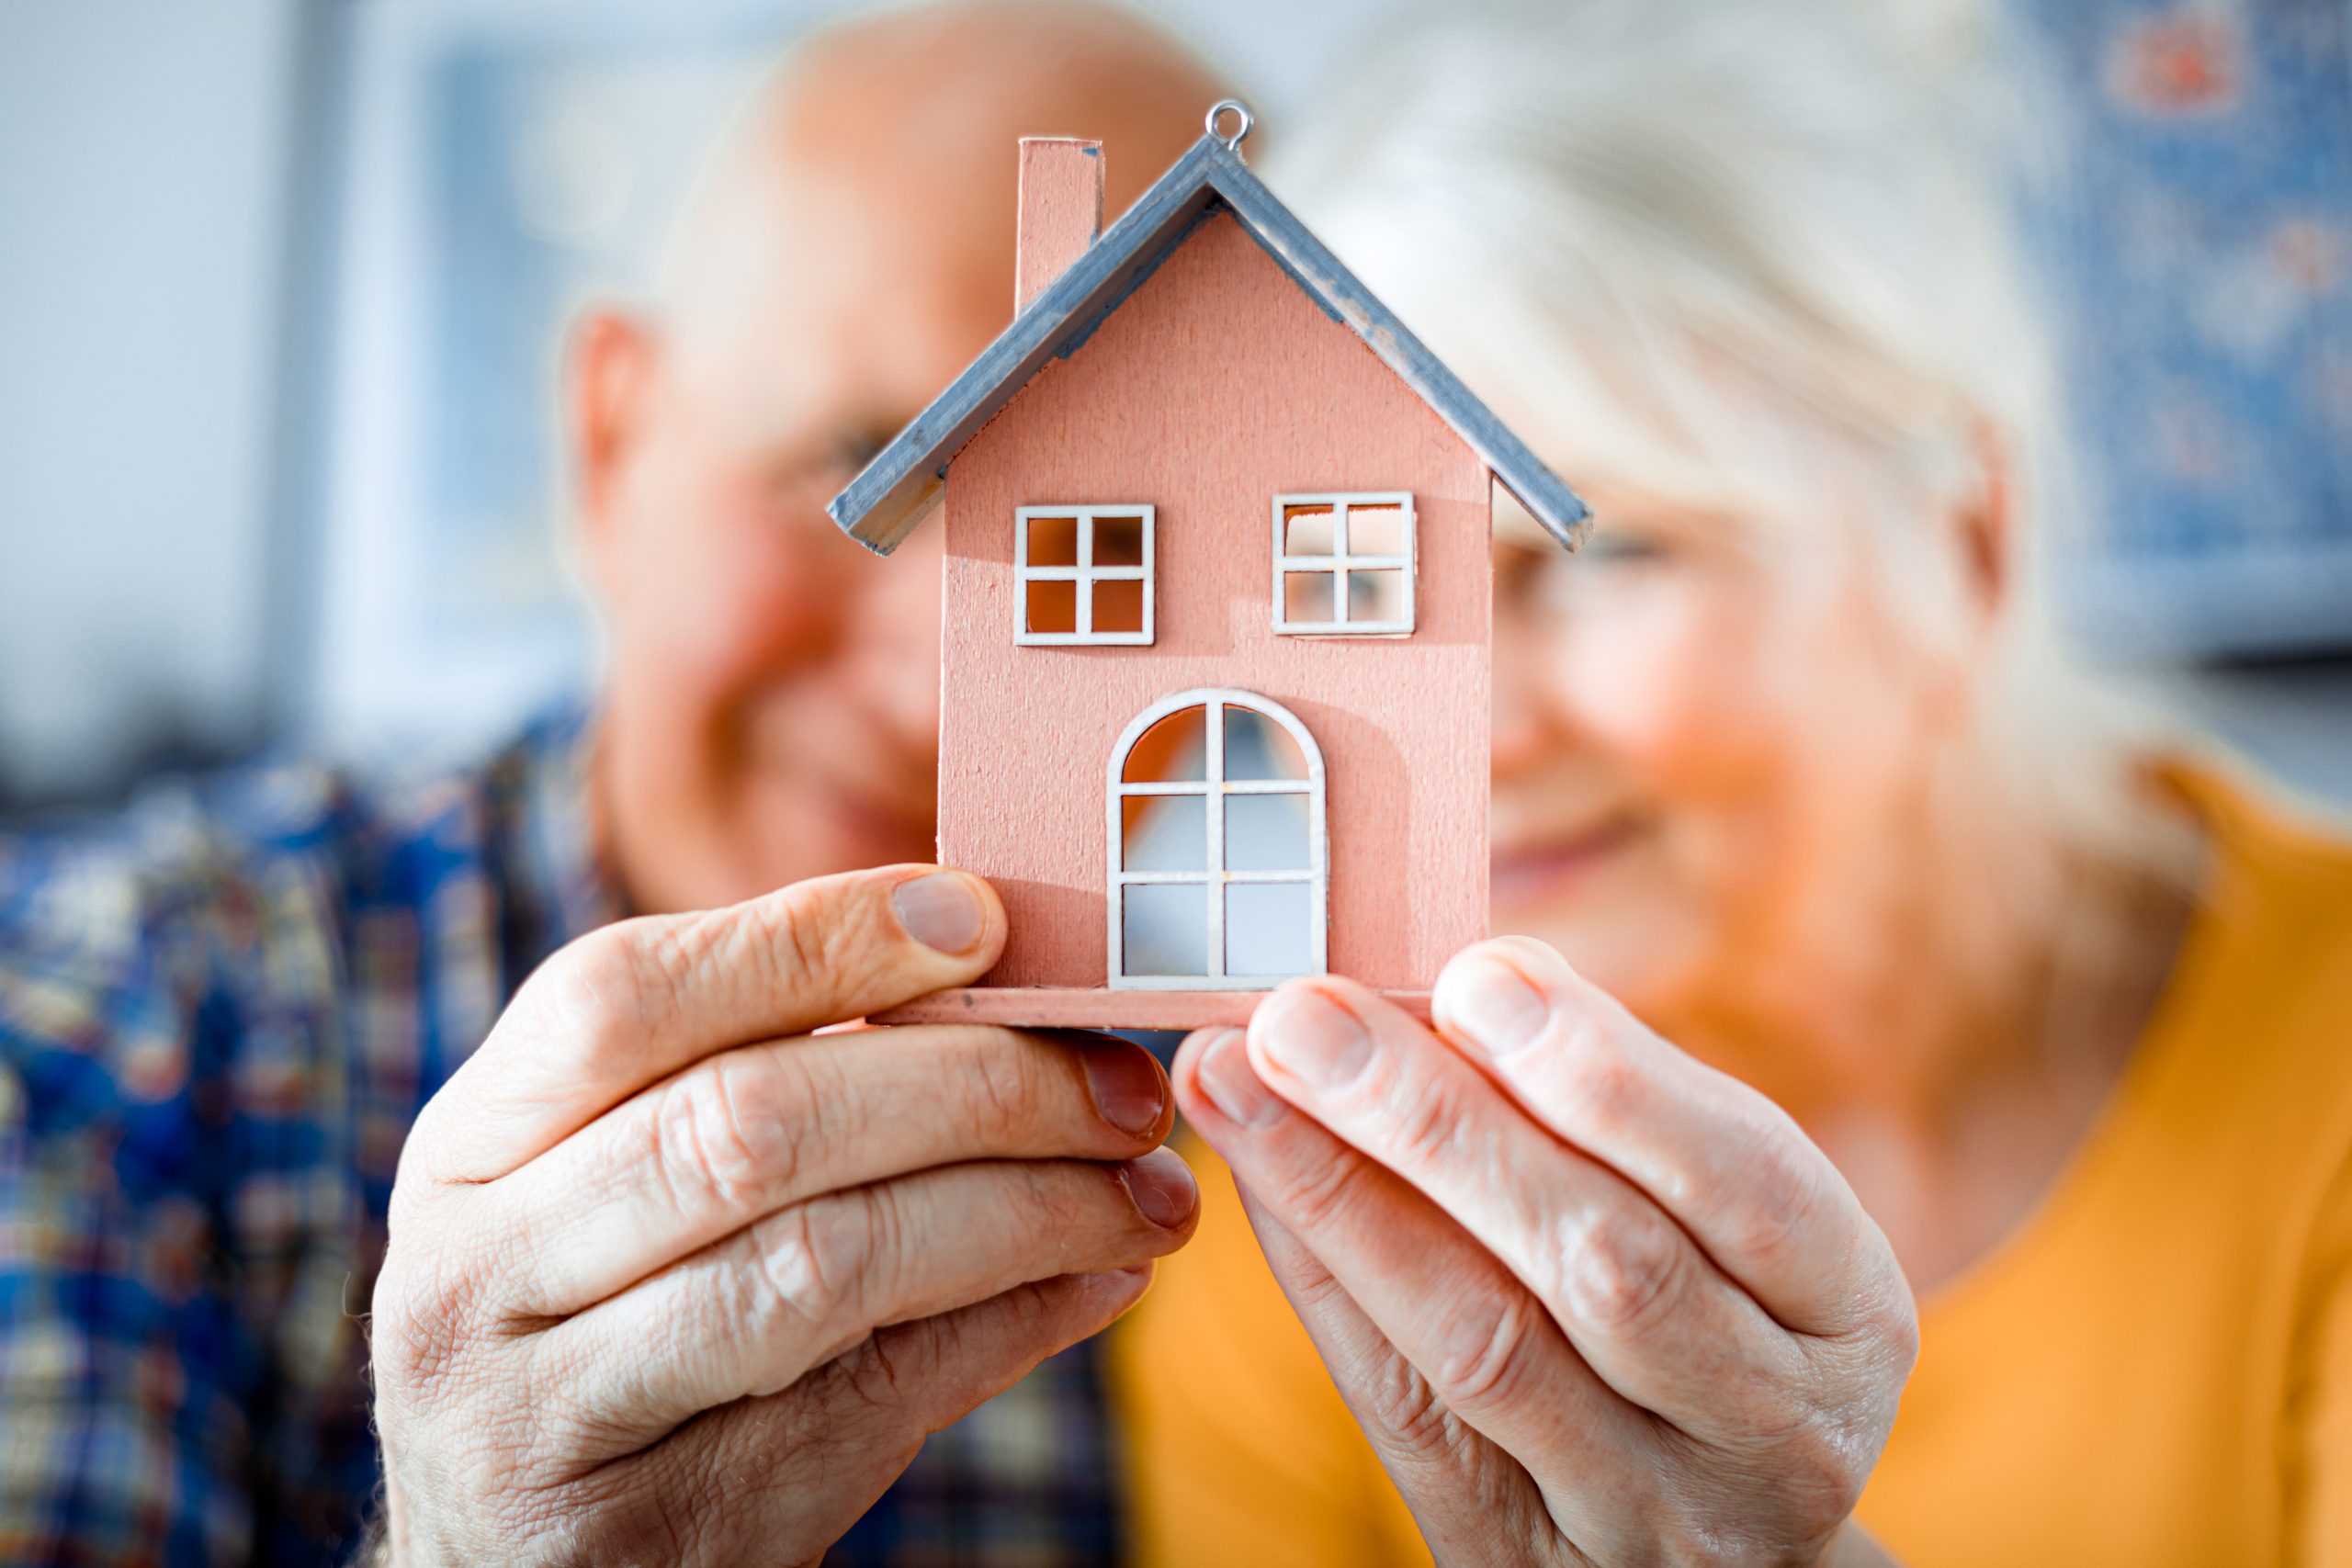 New house concept, happy senior couple holding small home model